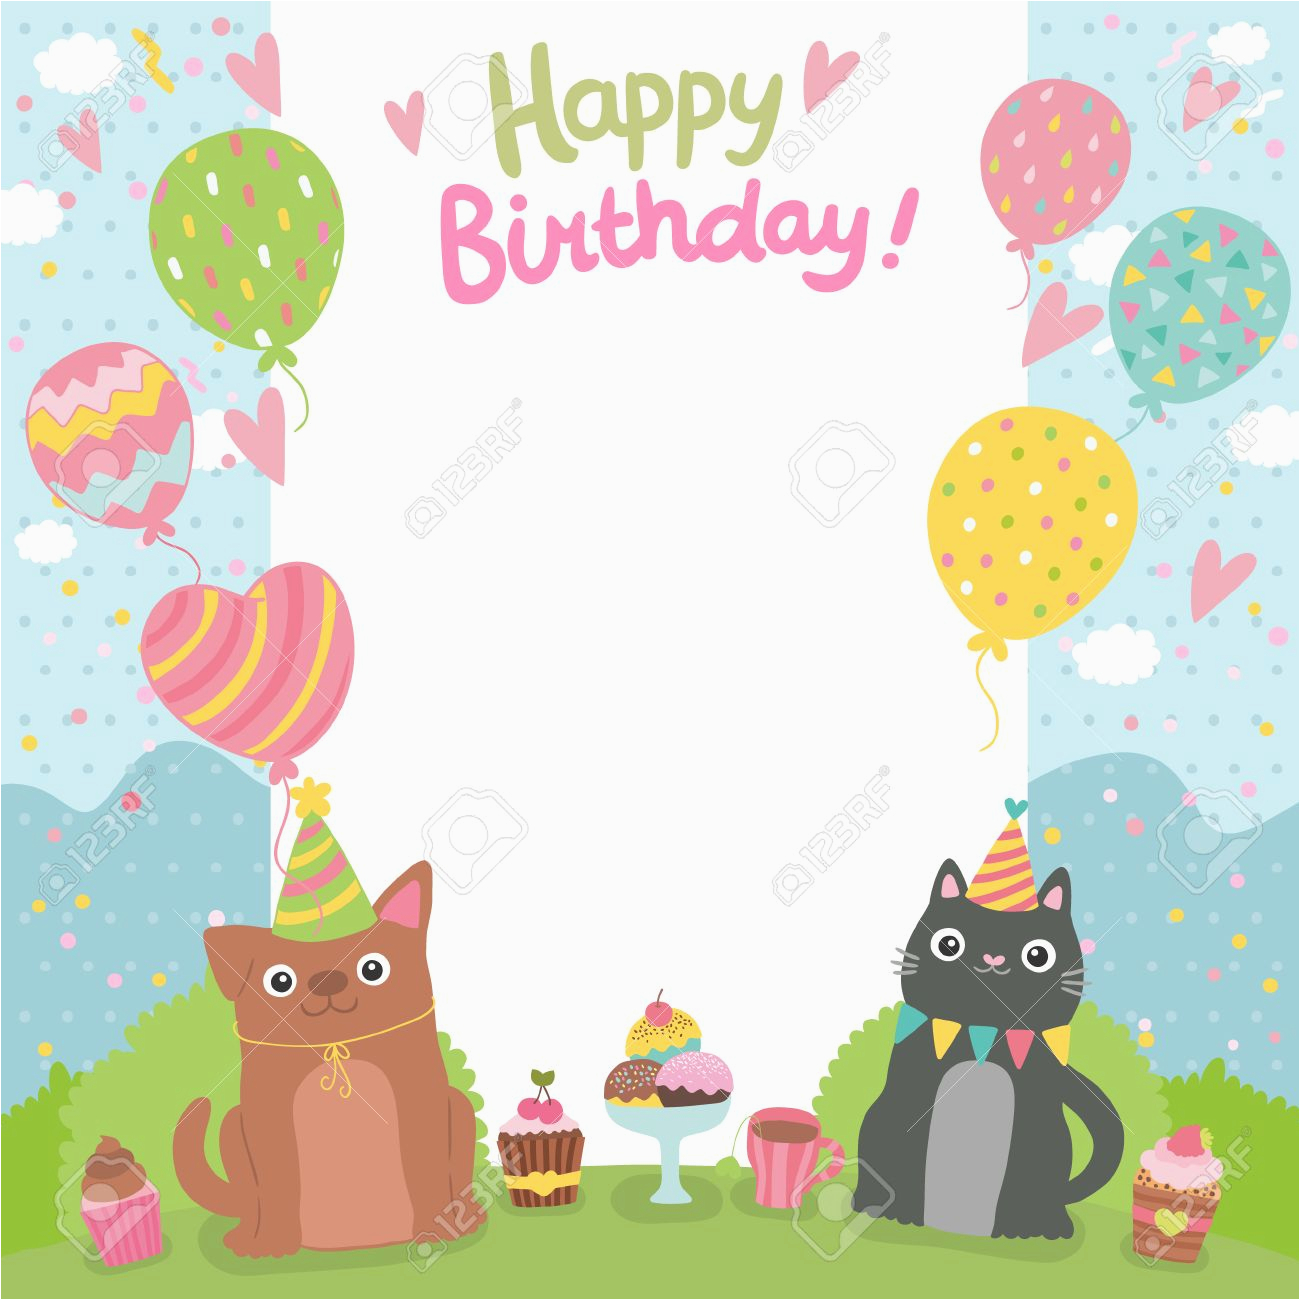 Website for Birthday Cards Happy Birthday Templates Photo Gallery On